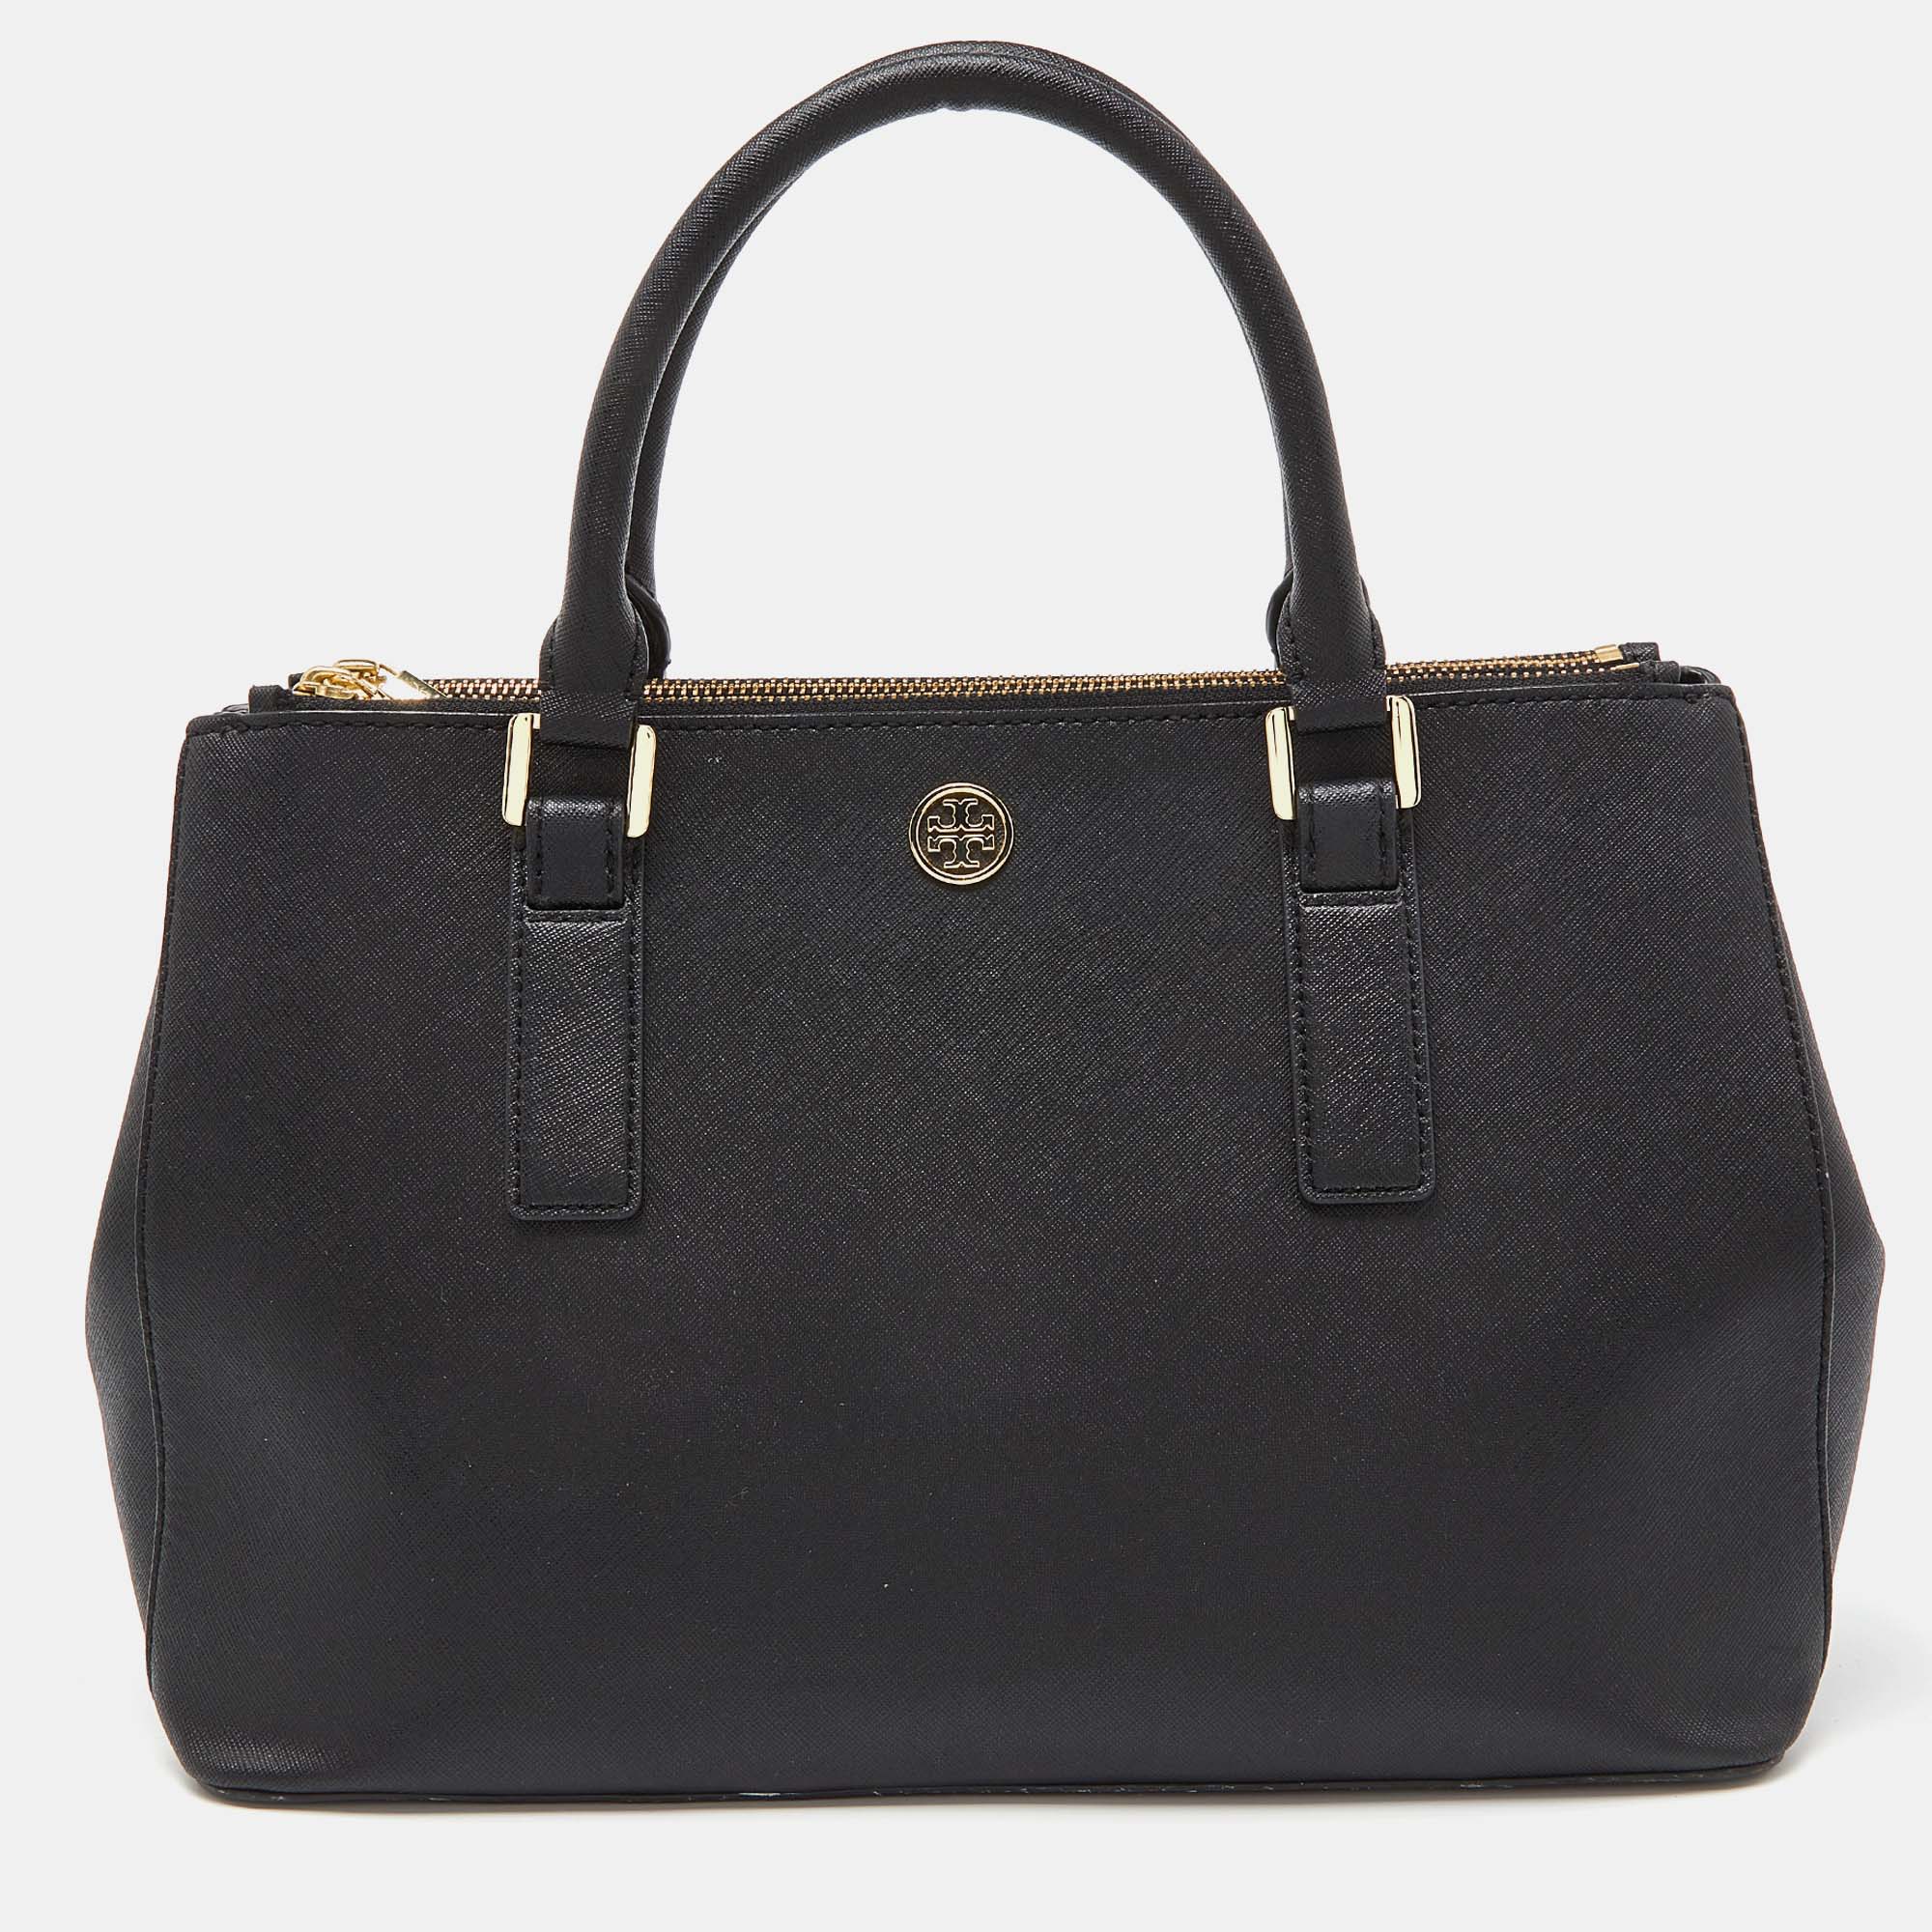 Tory Burch Black Leather Double Zip Robinson Tote